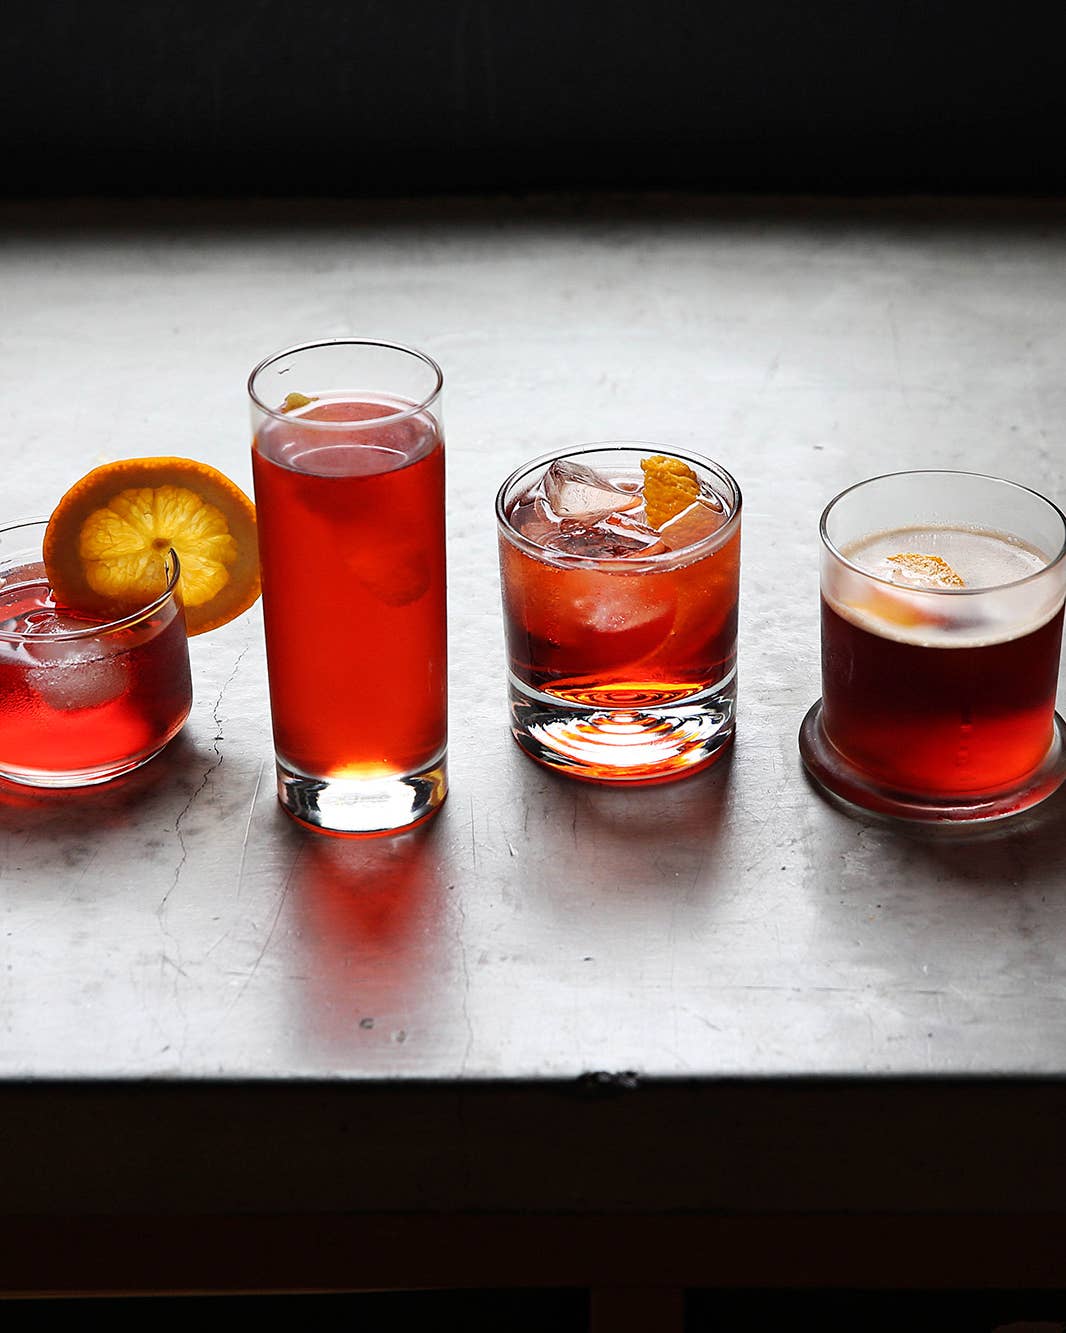 A Timeline of the Negroni